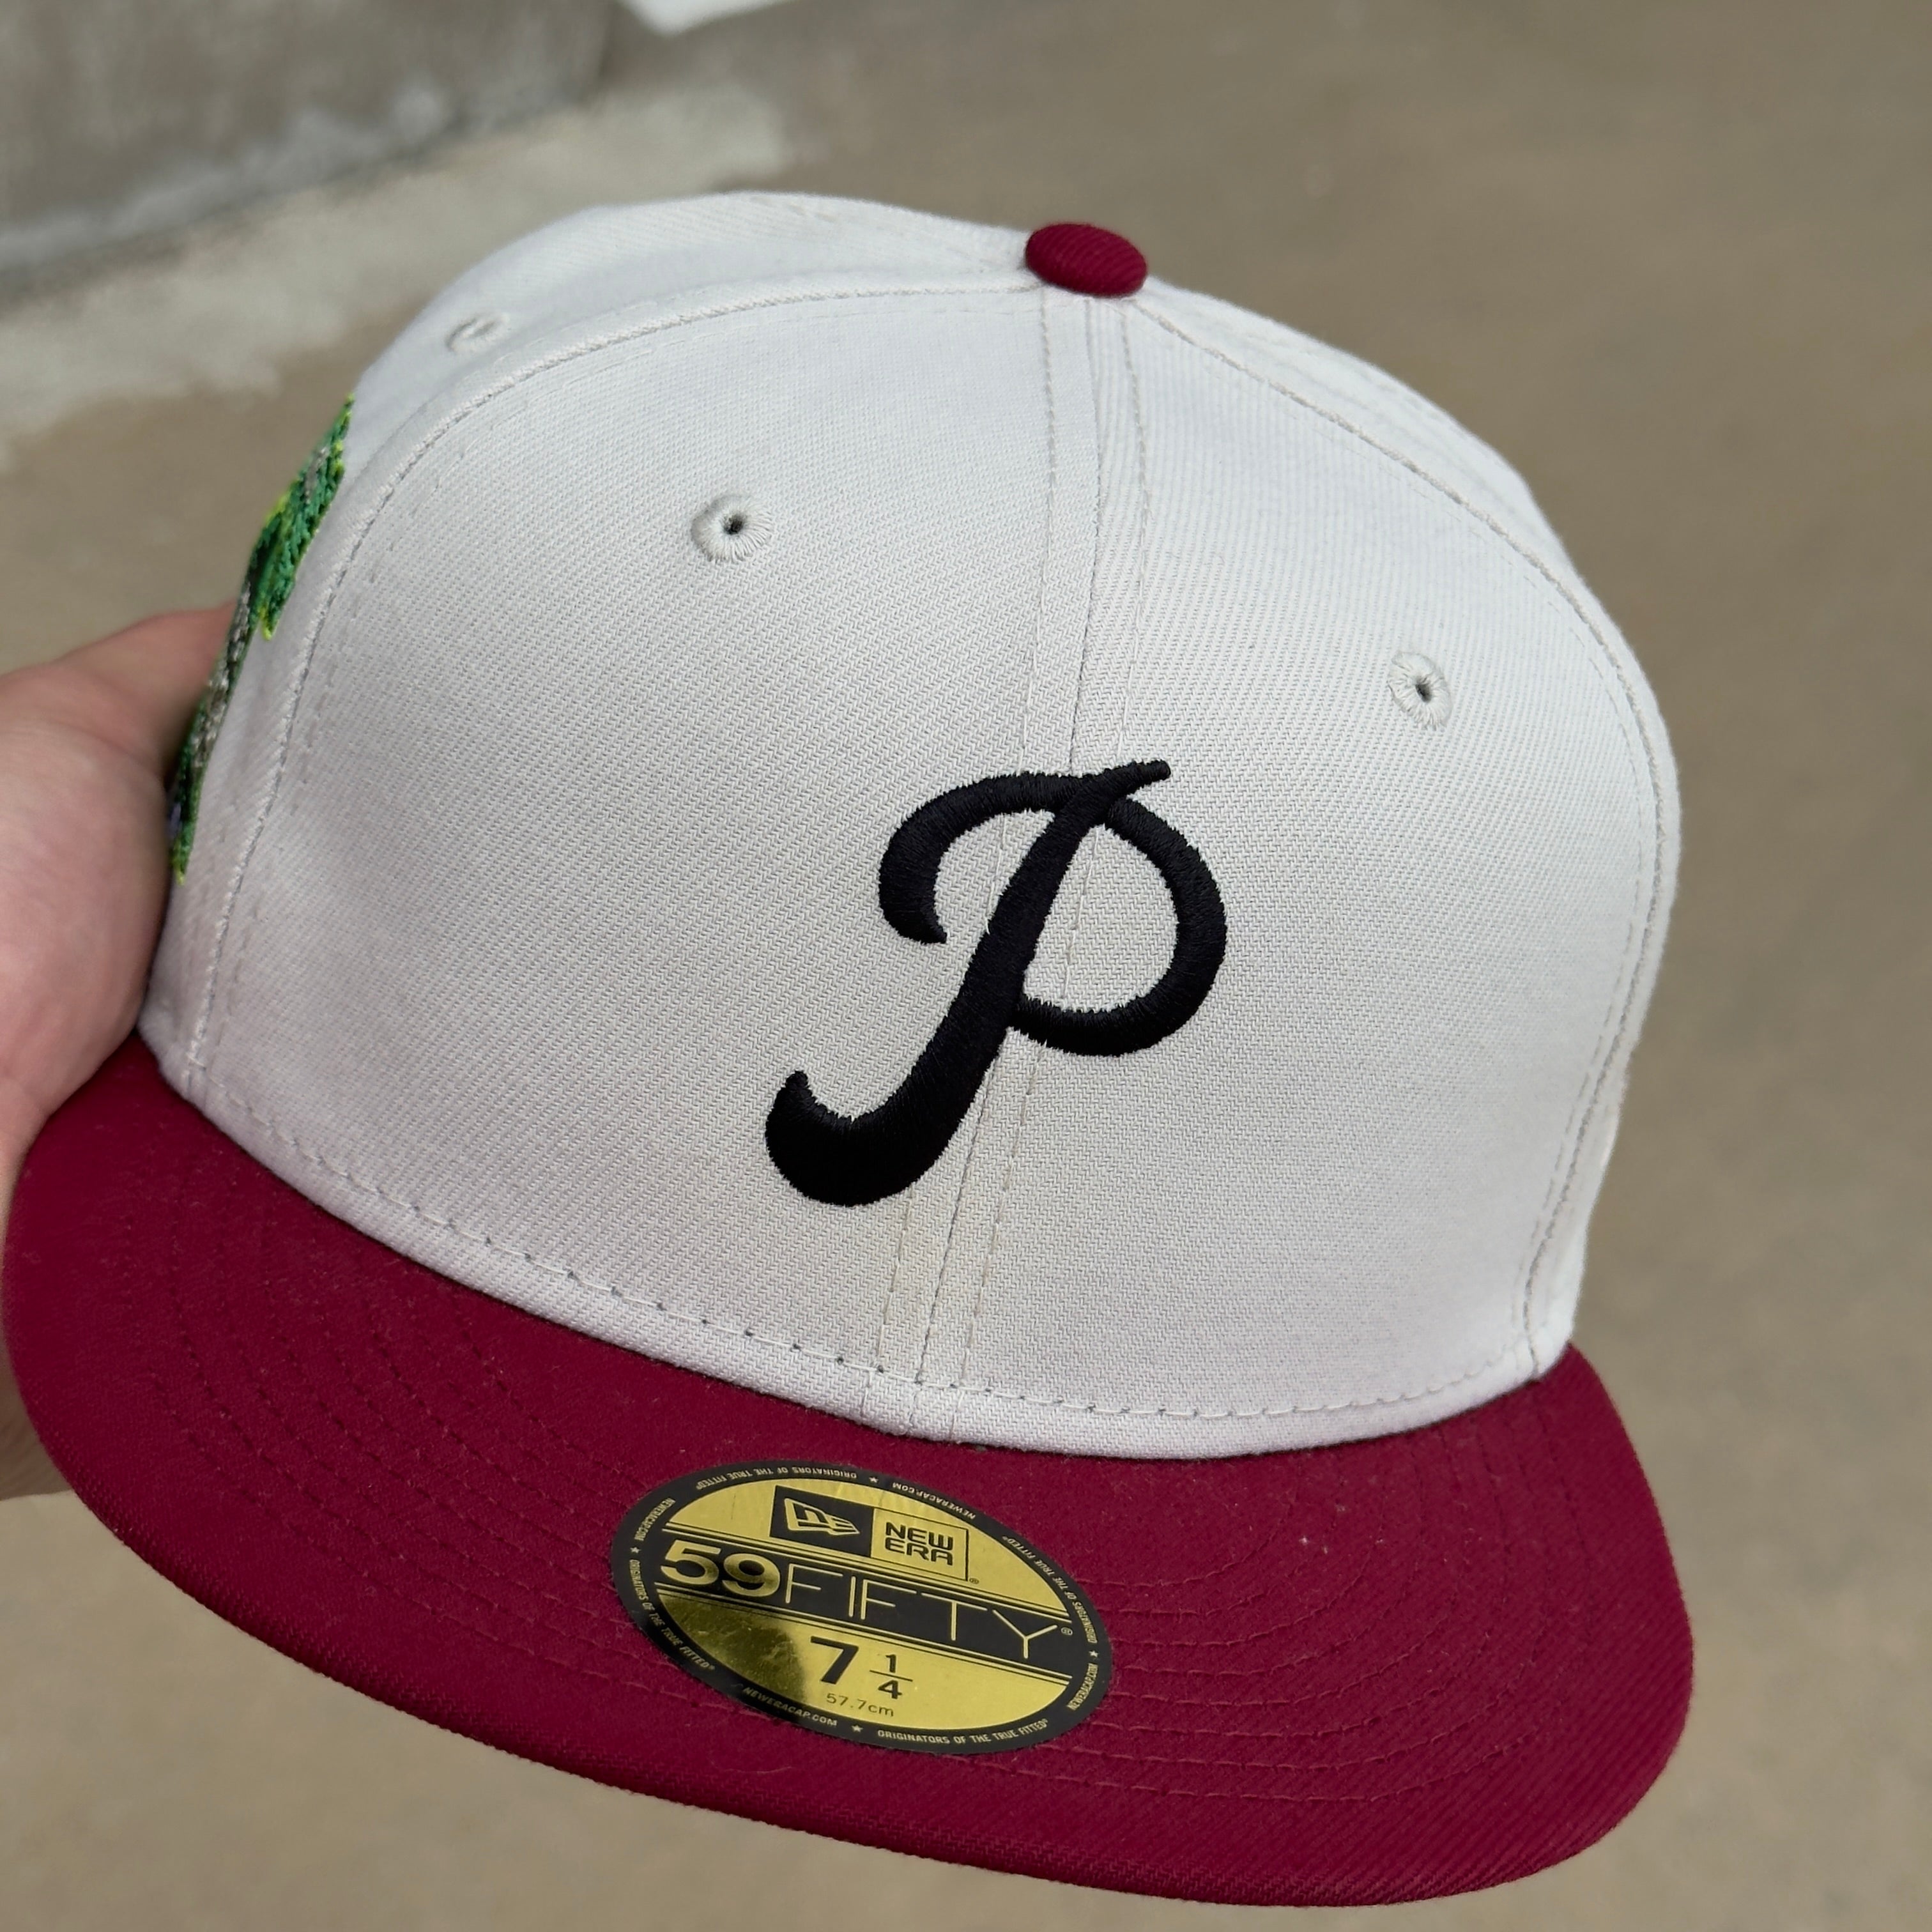 1/4 NEW Stone Philedelphia Phillies 1952 All Star Game Hatclub 59fifty New Era Fitted Hat Cap